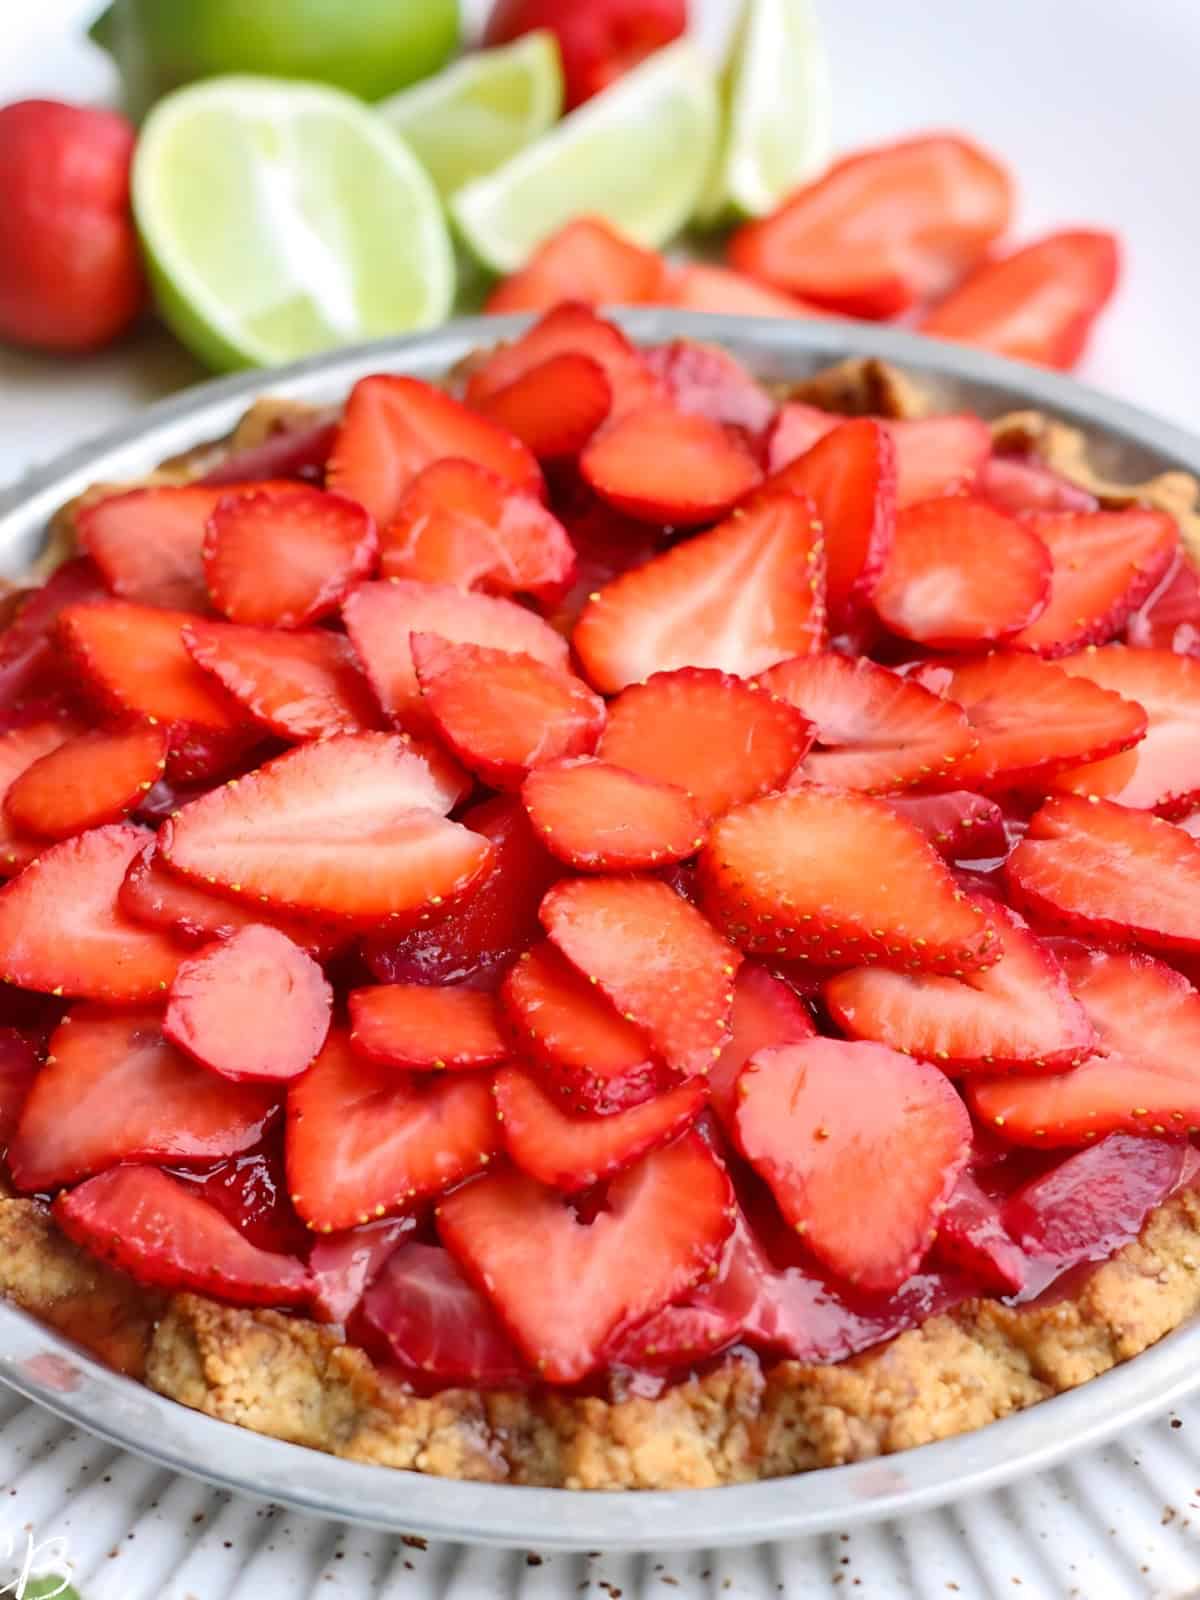 Strawberry Coconut Lime Cream Pie on a pie tray, topped with thinly sliced strawberries arranged in a flower design.